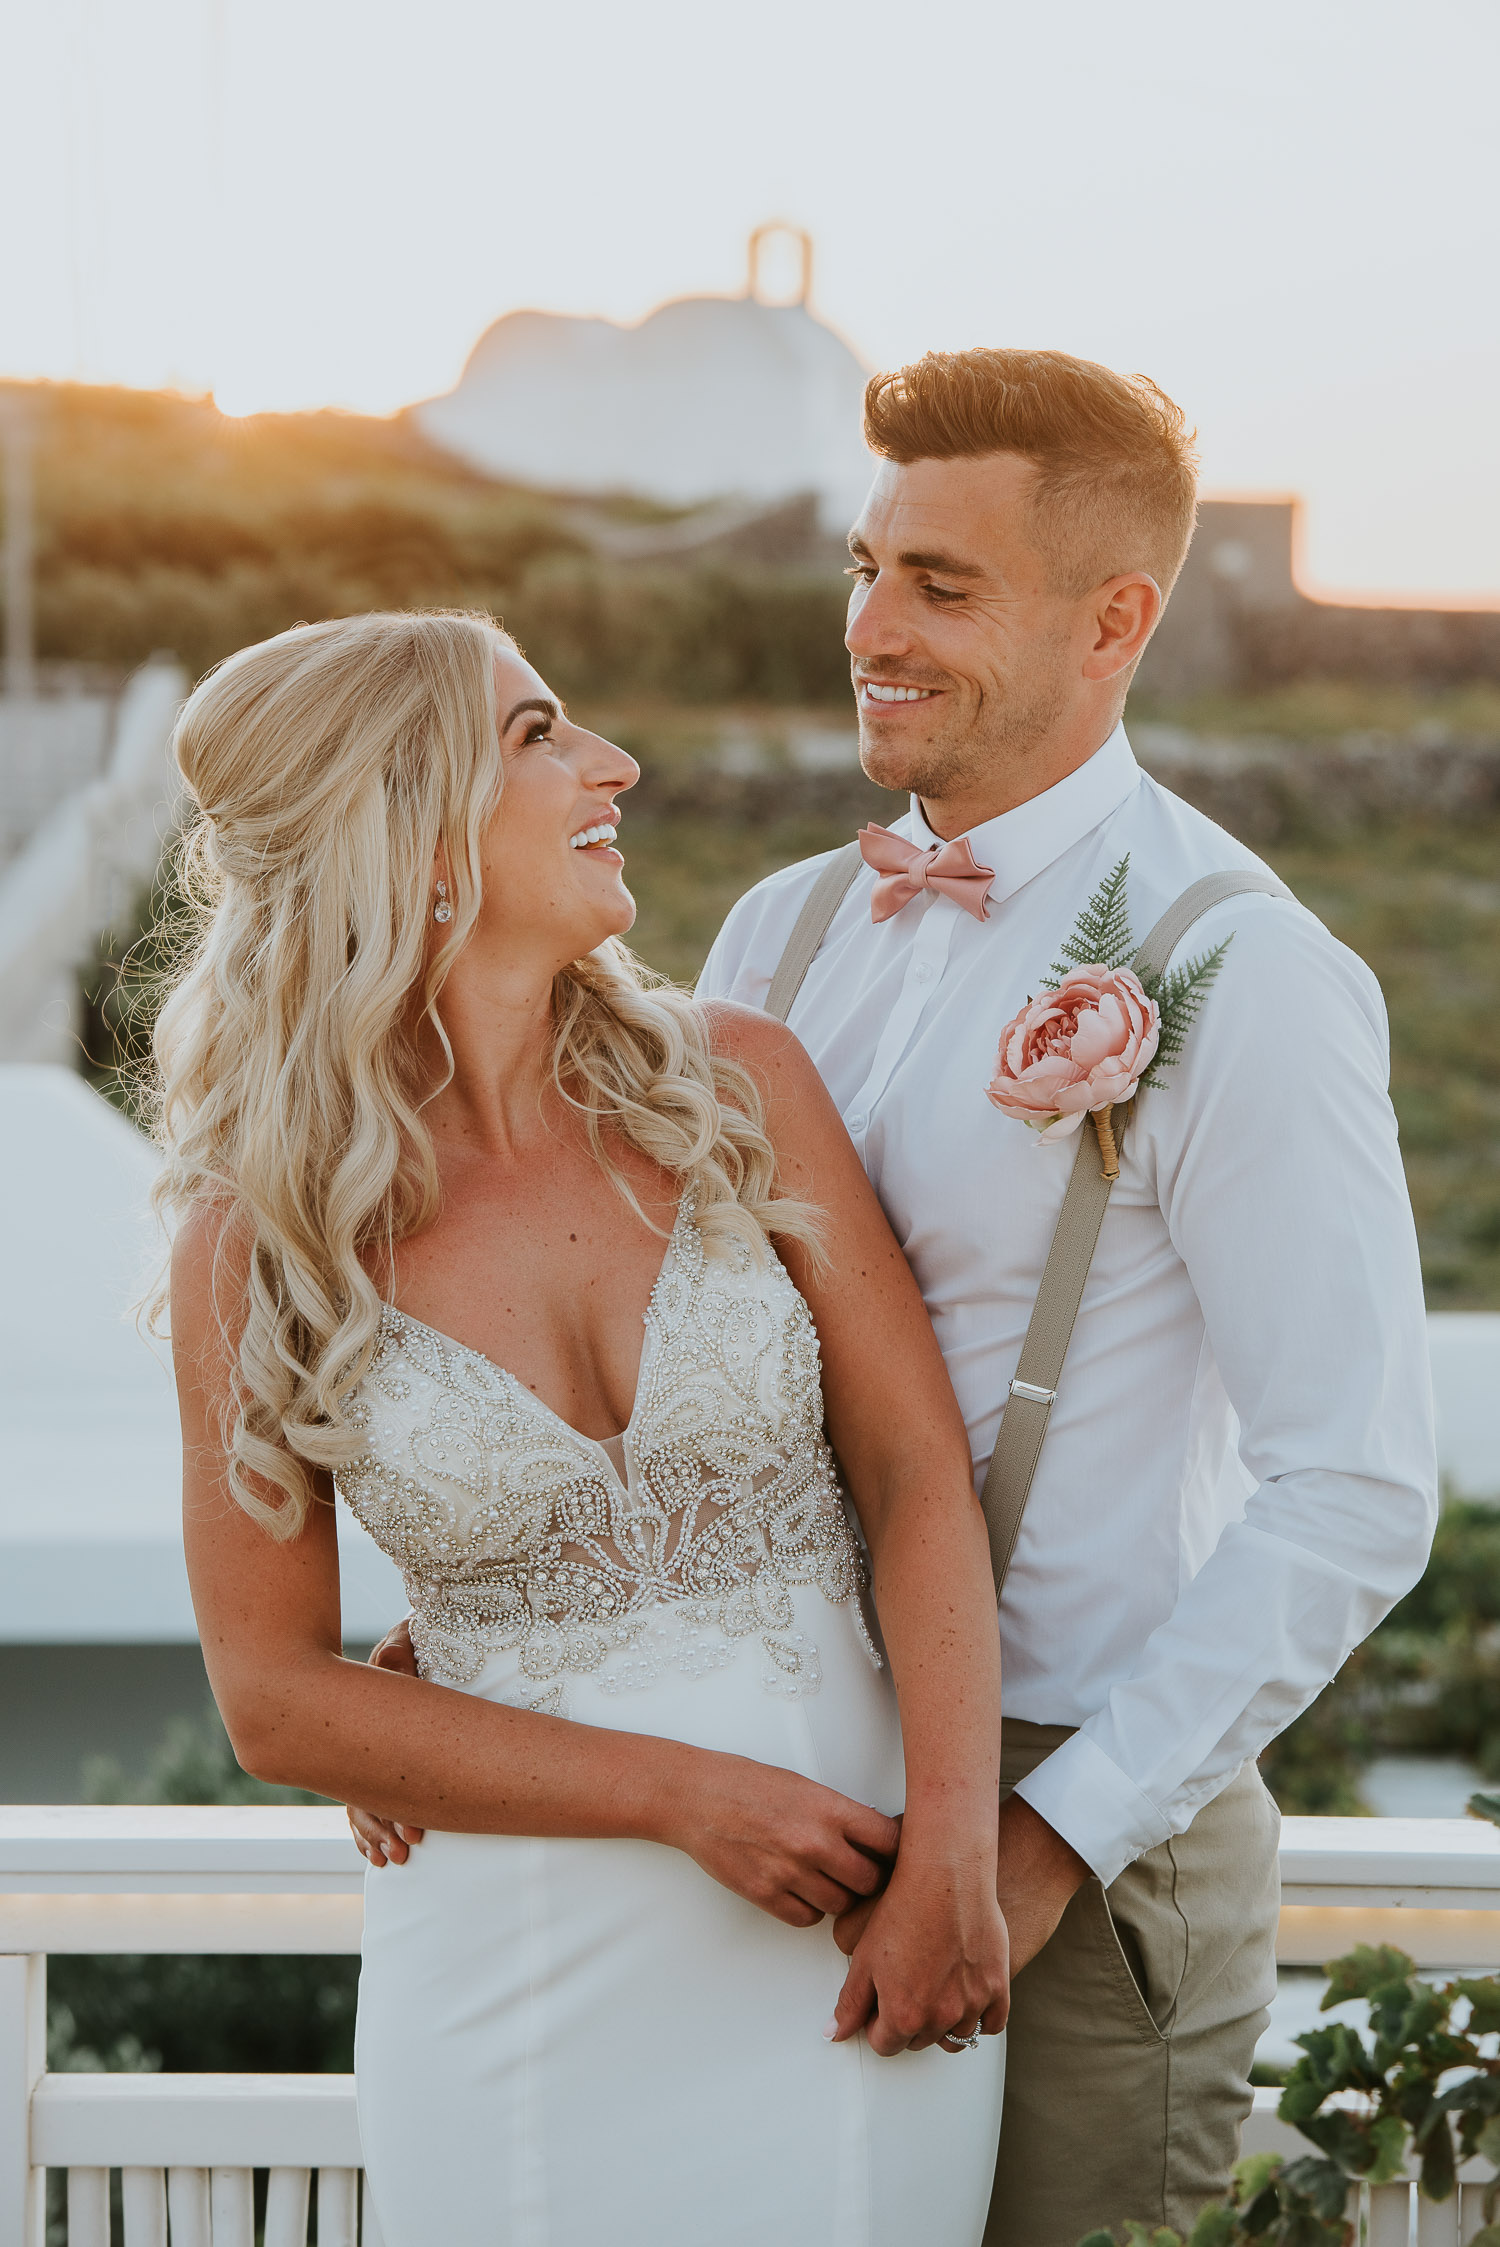 Wedding photographer Santorini: close up of bride and groom smiling backlit by golden sunset light with a church in the background by Ben and Vesna.